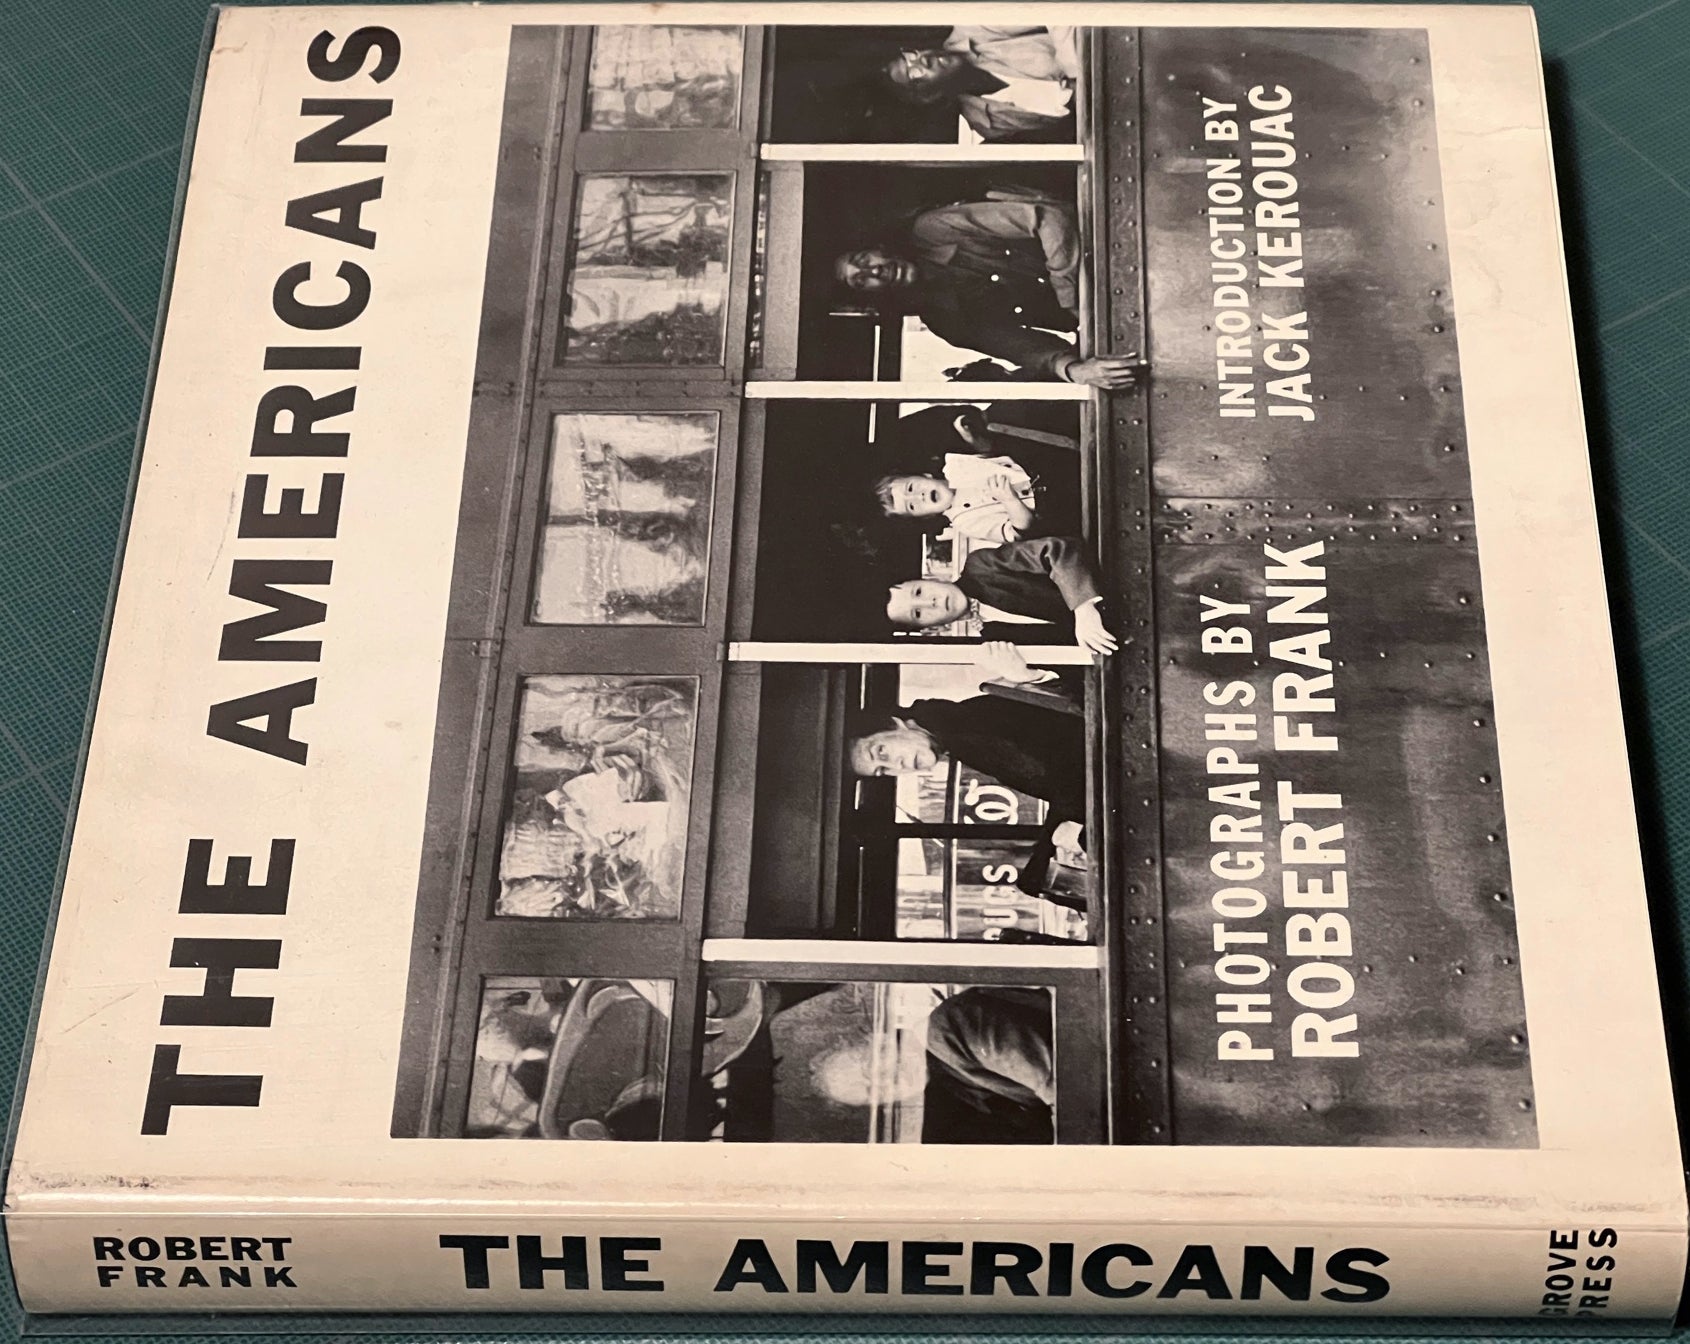 Robert Frank: The Americans (First American Edition, Grove Press, 1959) [SIGNED]